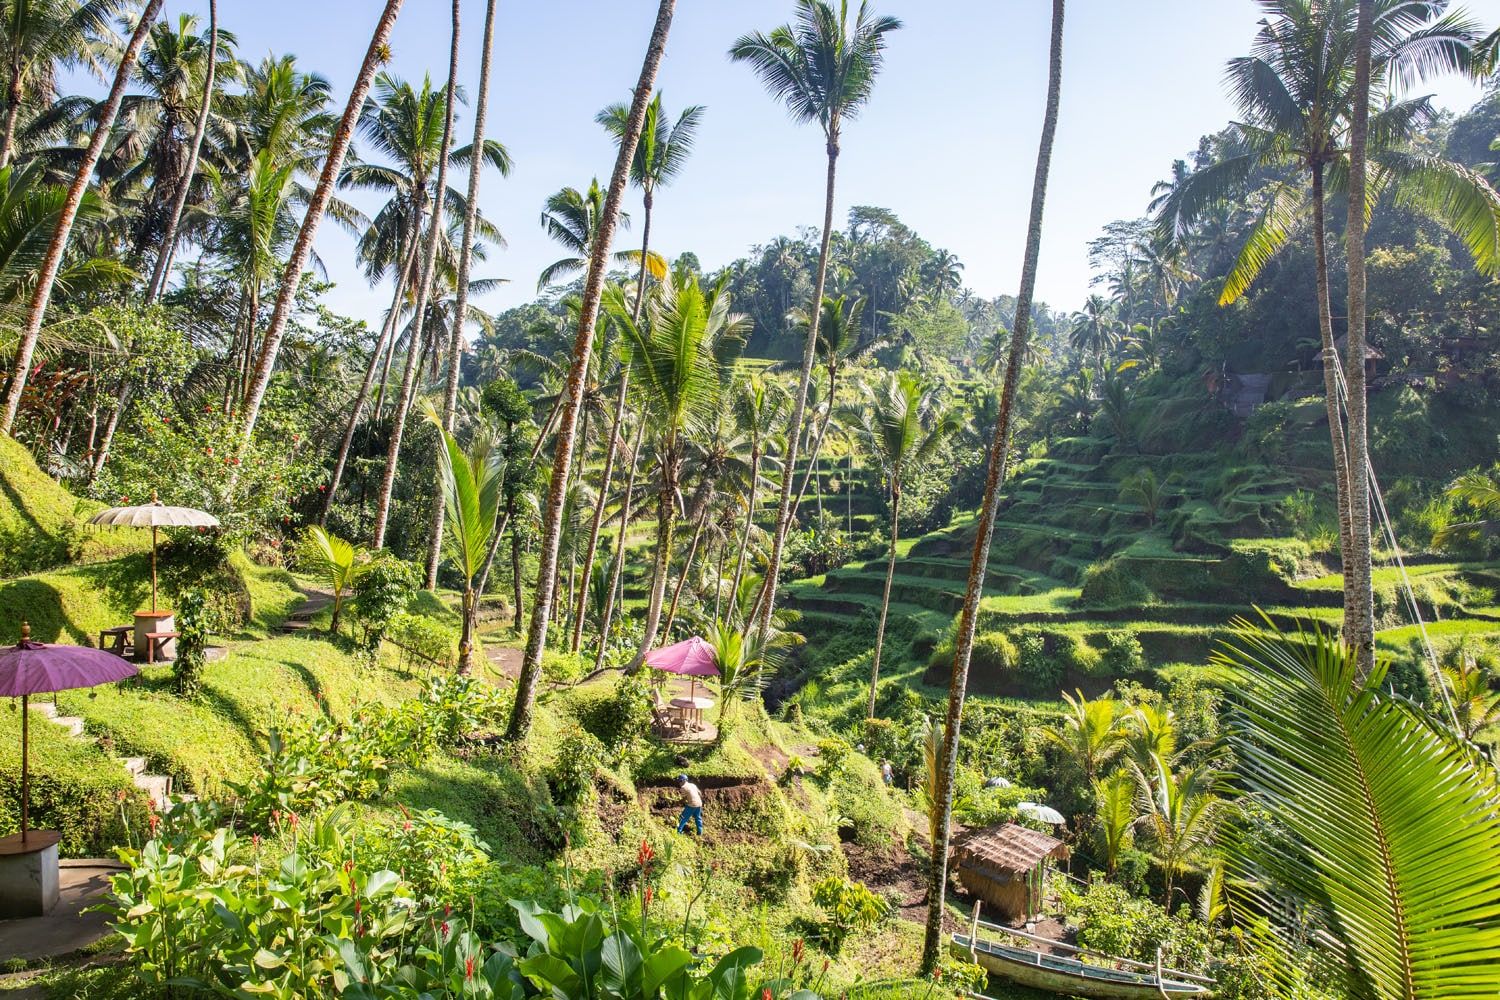 Tegalalang | Best Things to Do in Bali